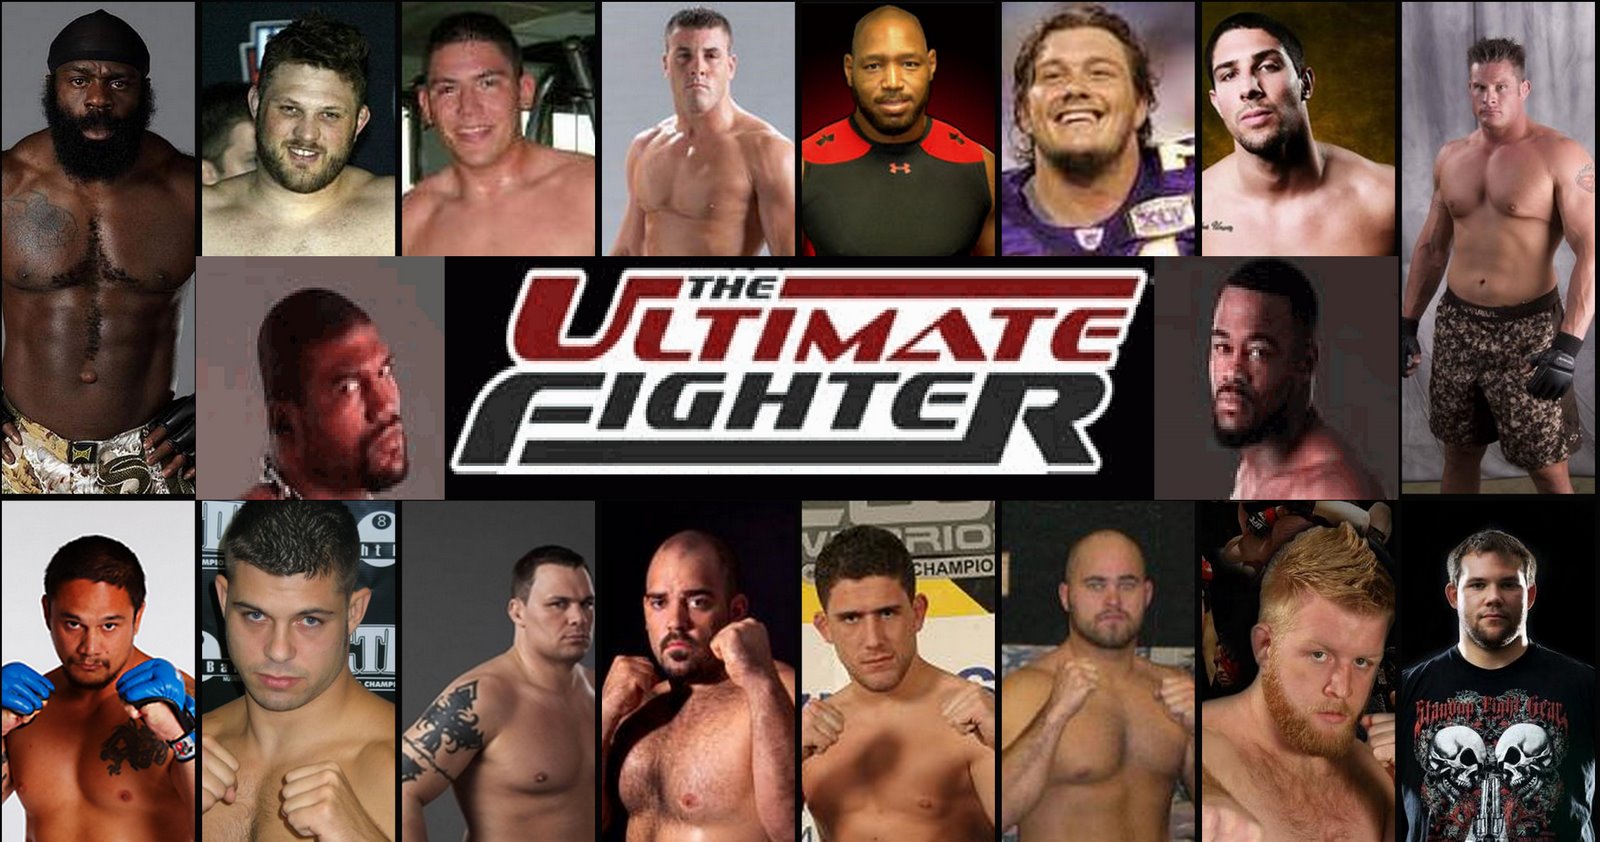 The Ultimate Fighter Season 10 Heavyweights (the one with Kimbo Slice